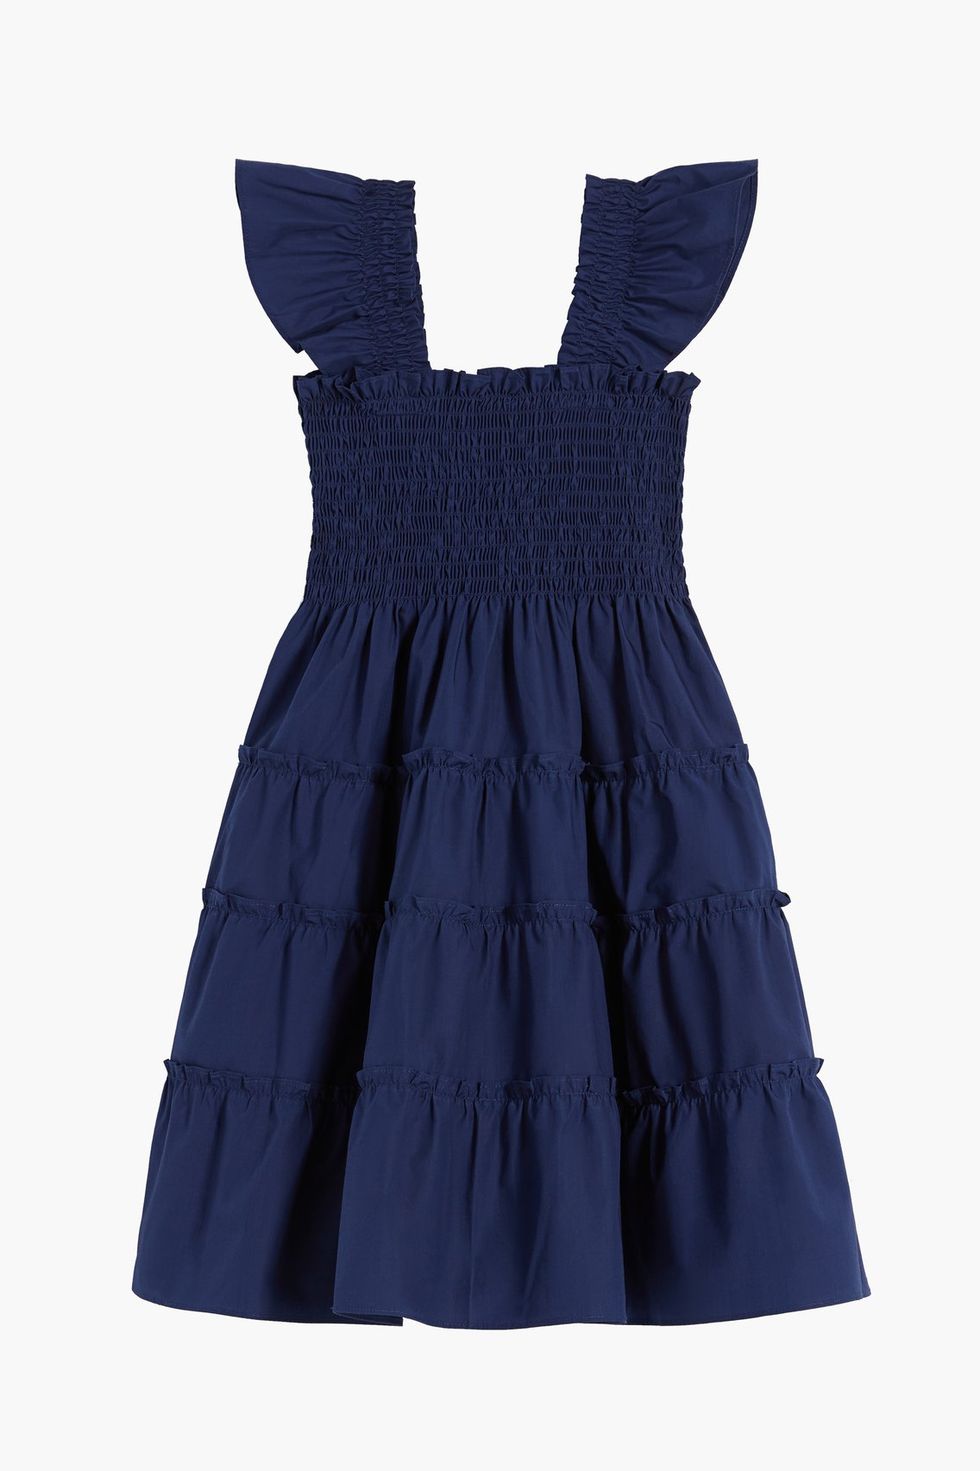 Hill House Home Launches Kids Nap Dresses For the Cutest Mommy-and-Me ...